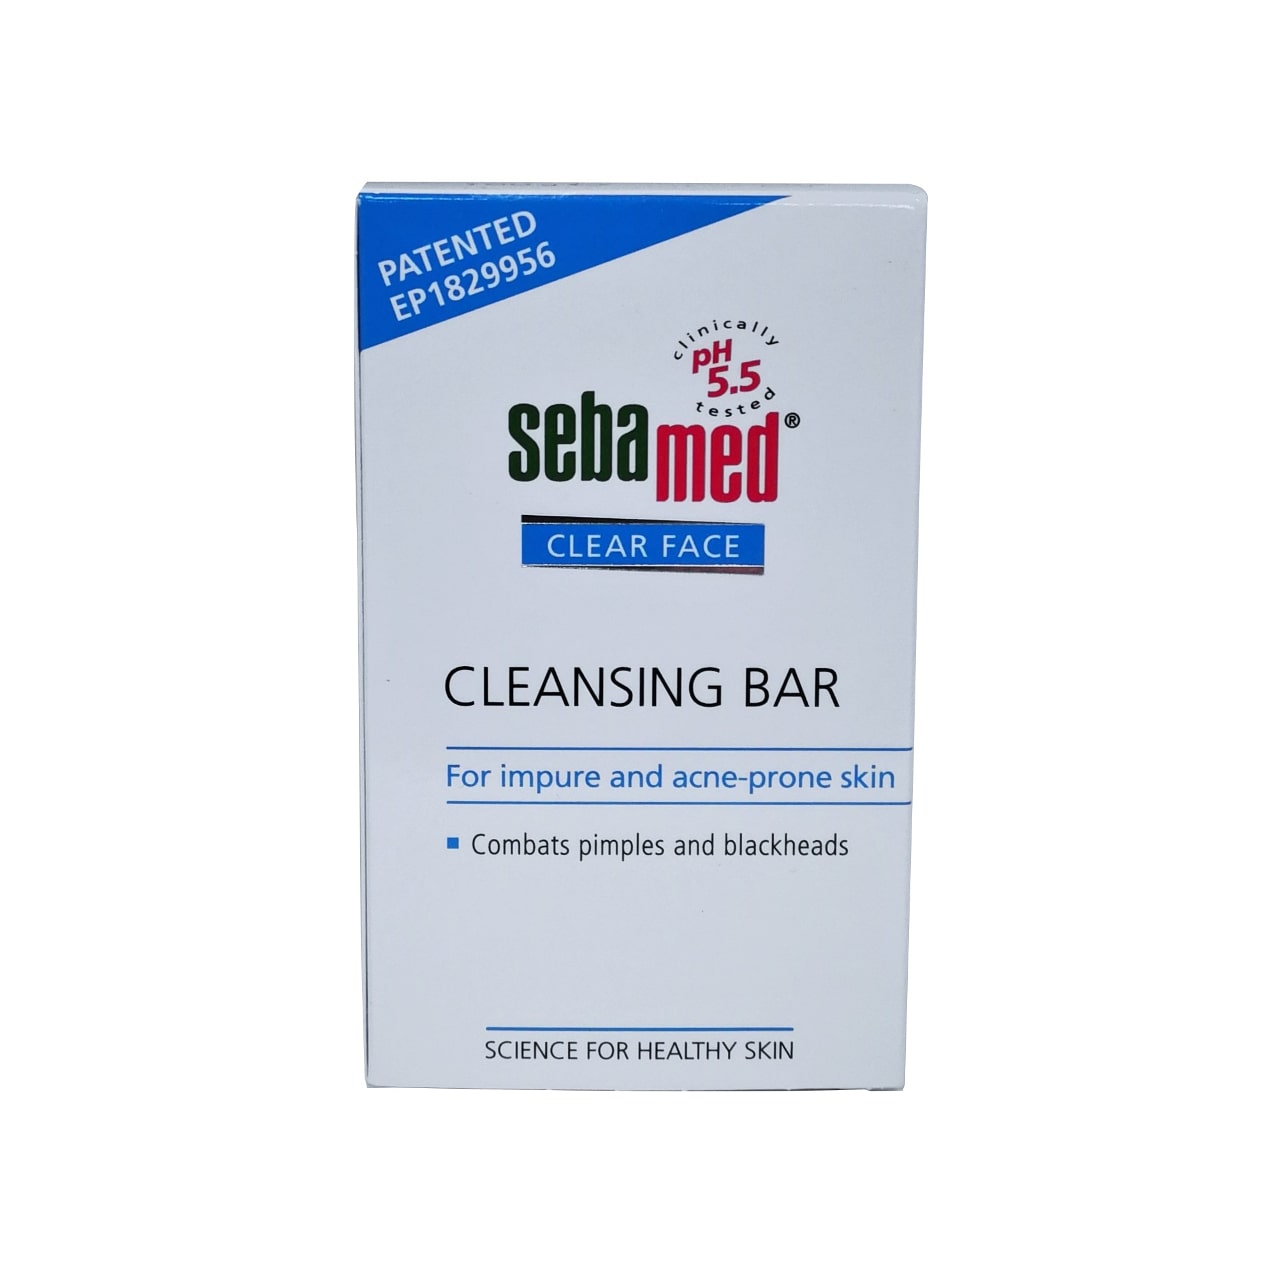 Product label for Sebamed Clear Face Cleansing Bar in English